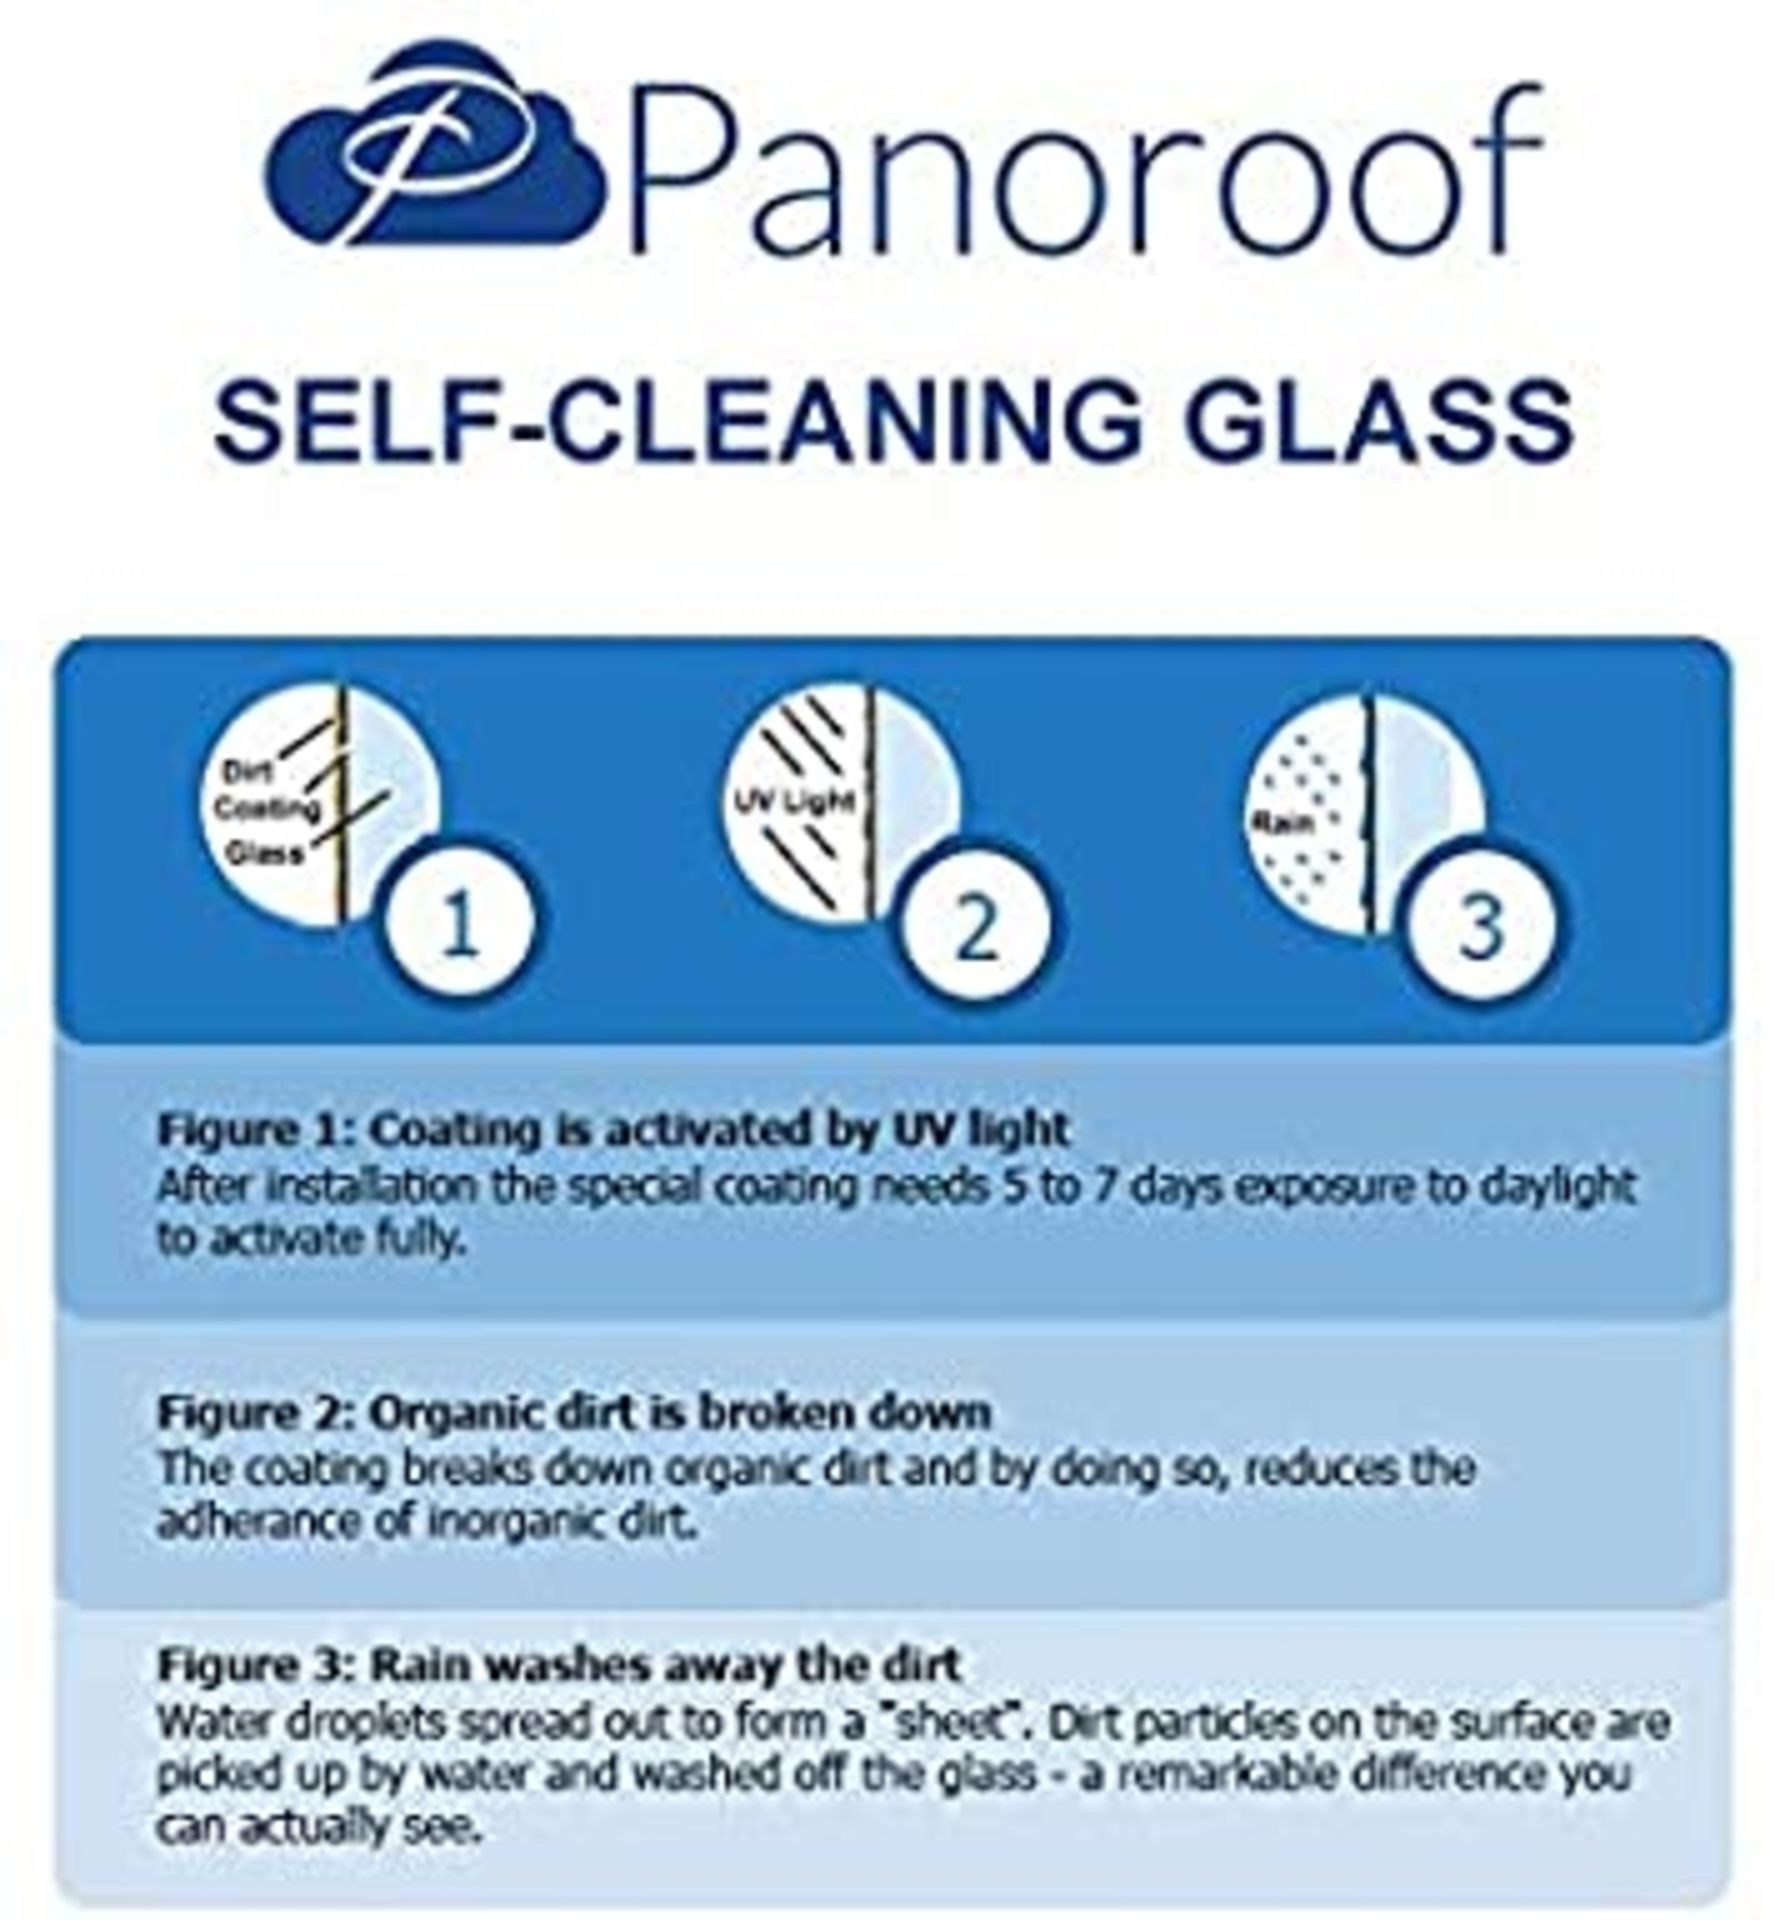 """Panoroof Triple Glazed Self Cleaning 600x600mm (inside Size Visable glass area) Seamless Glass - Image 6 of 6